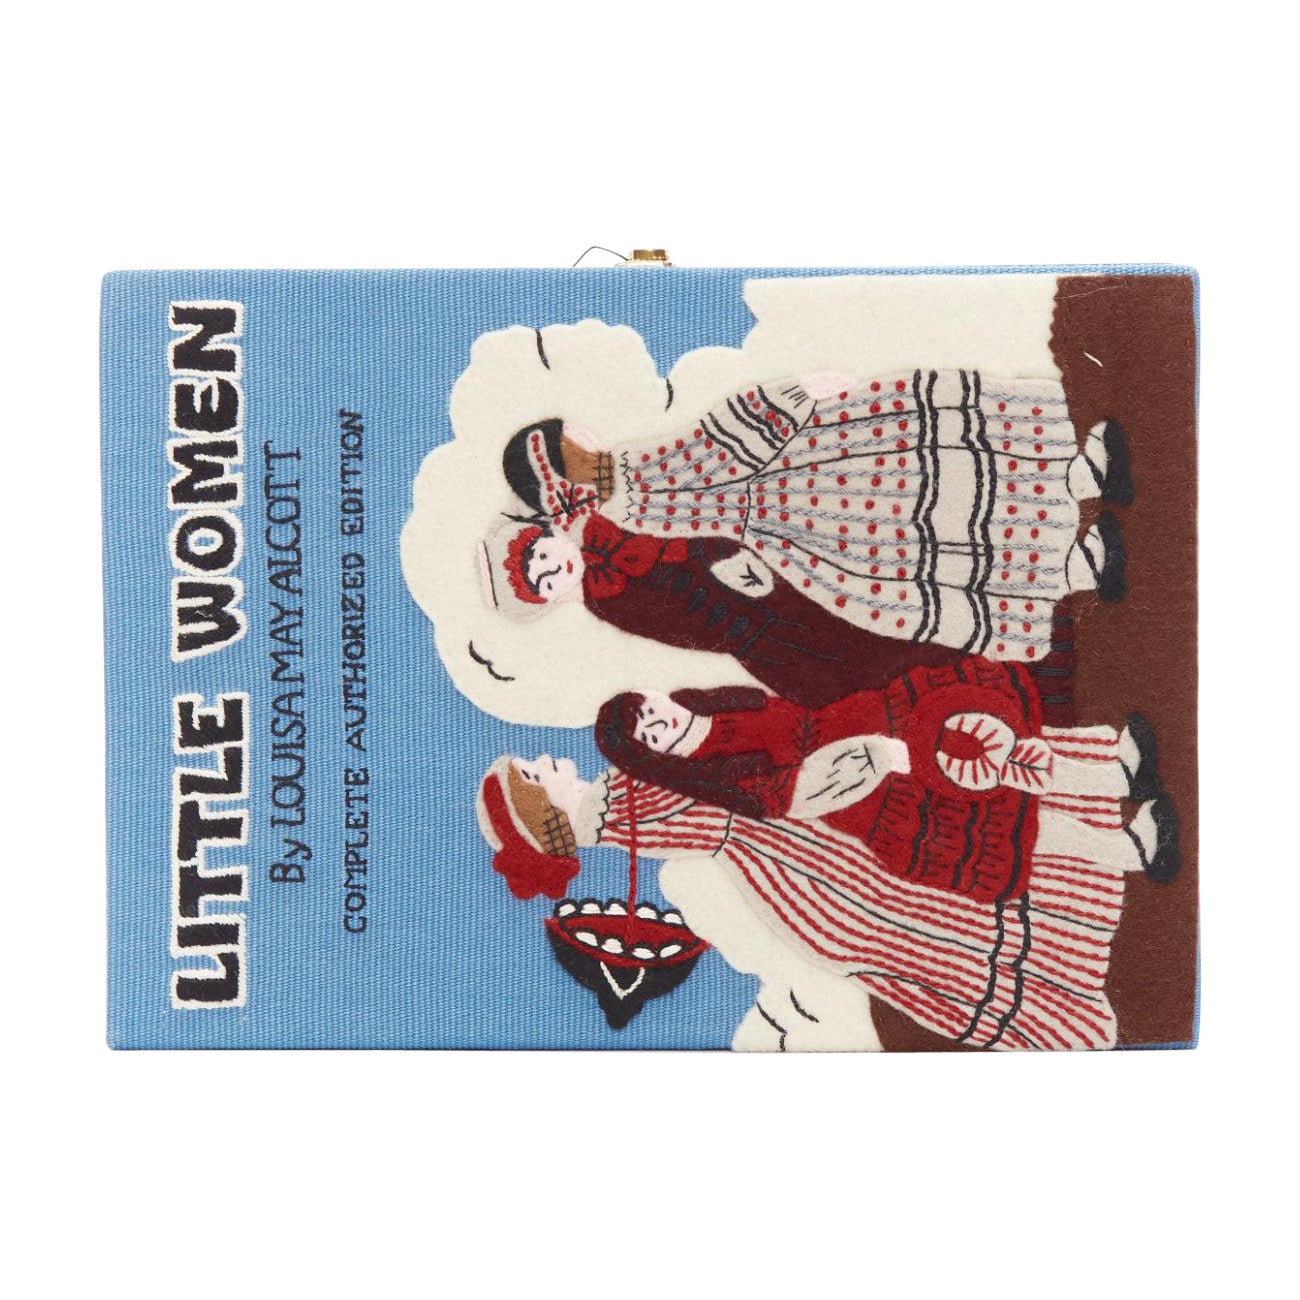 OLYMPIA LE TAN Little Women Louisa May Alcott blue book cover box clutch bag For Sale